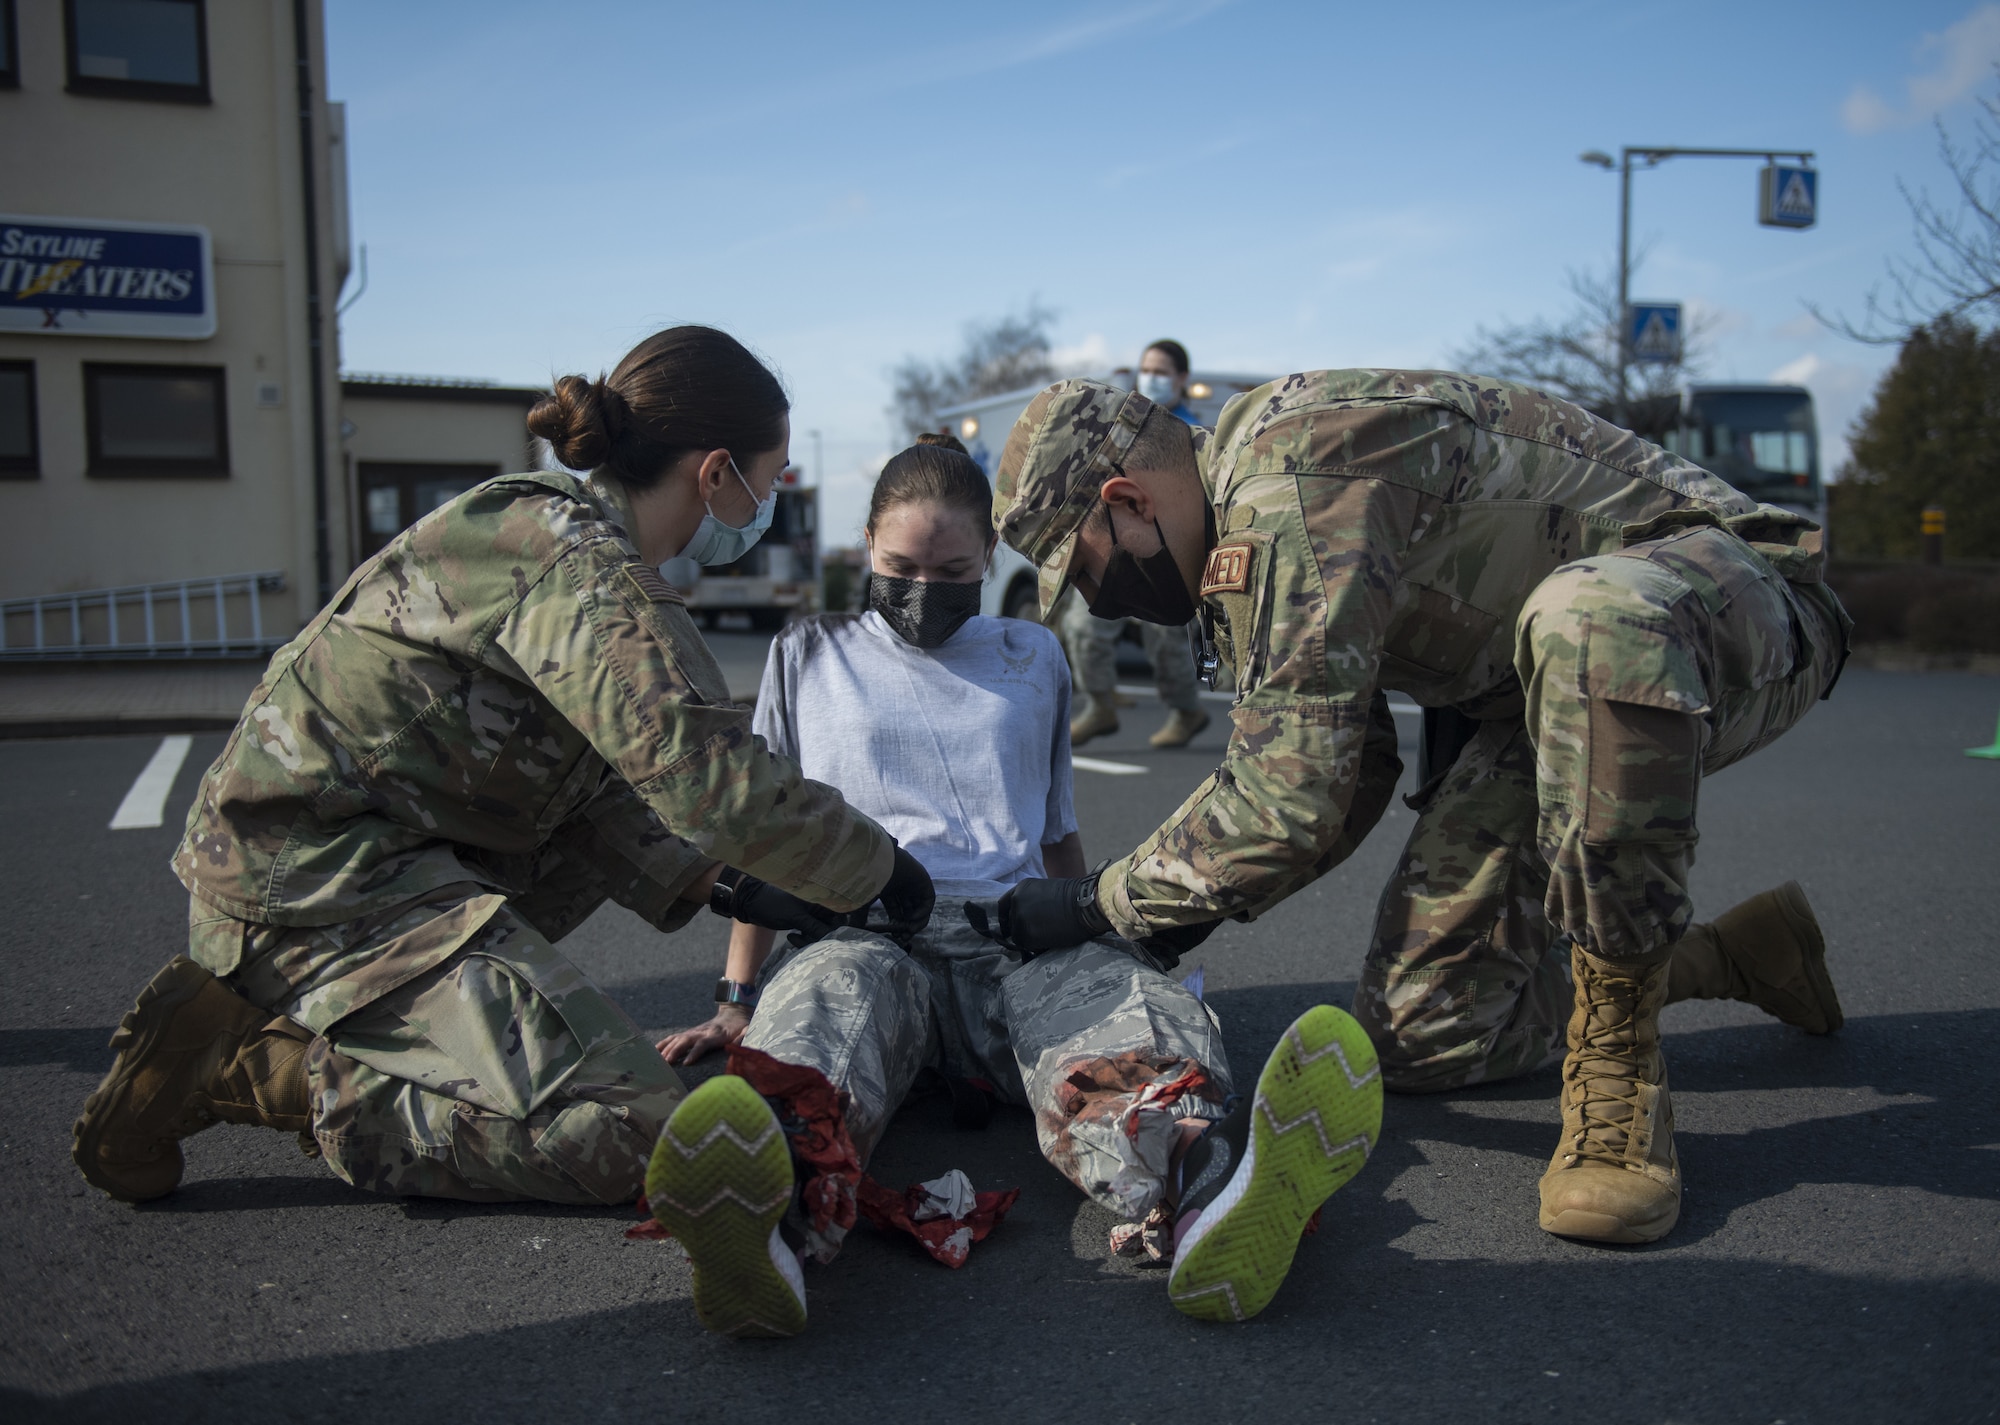 Two U.S. Air Force Airmen from the 52nd Medical Group tend to a volunteer after a simulated disaster inside the base theater at Spangdahlem Air Base, Germany, March 26, 2021. The exercise allowed Airmen to hone disaster response skills such as command and control, patient stabilization and patient decontamination. (U.S. Air Force photo by Senior Airman Ali Stewart)